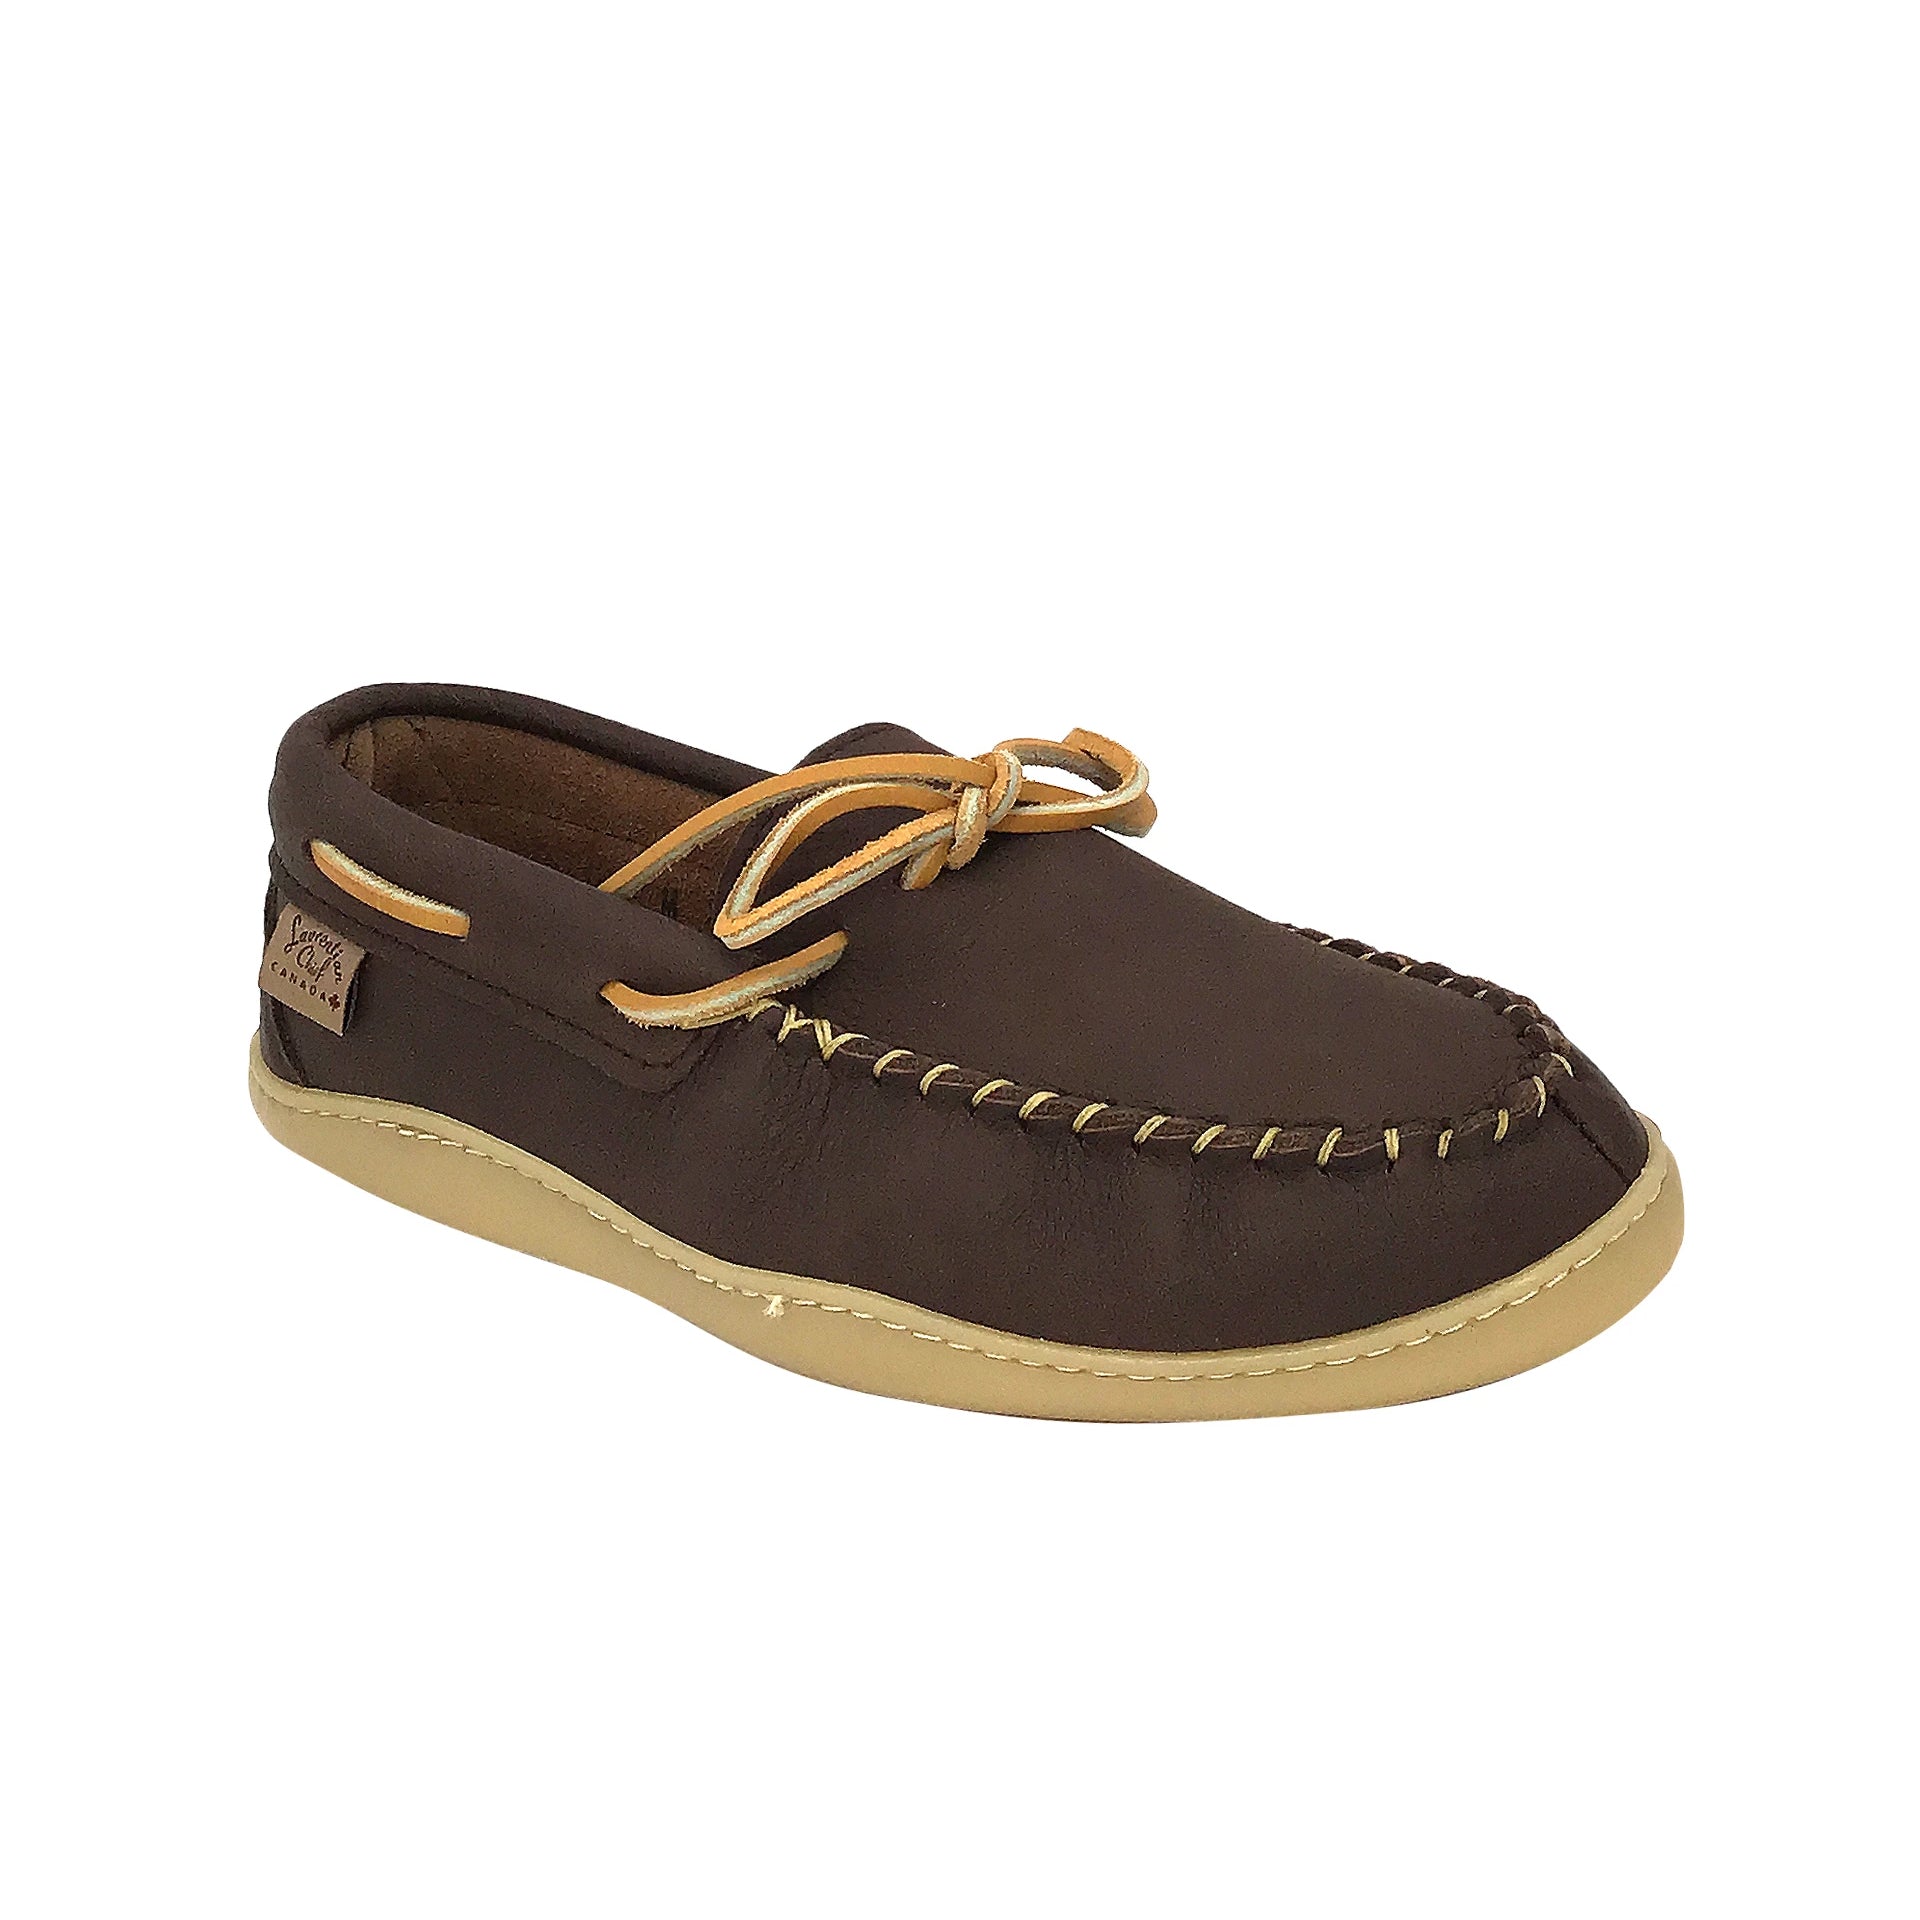 Men's Earthing Moccasin Shoes with Copper Rivet Rubber Sole